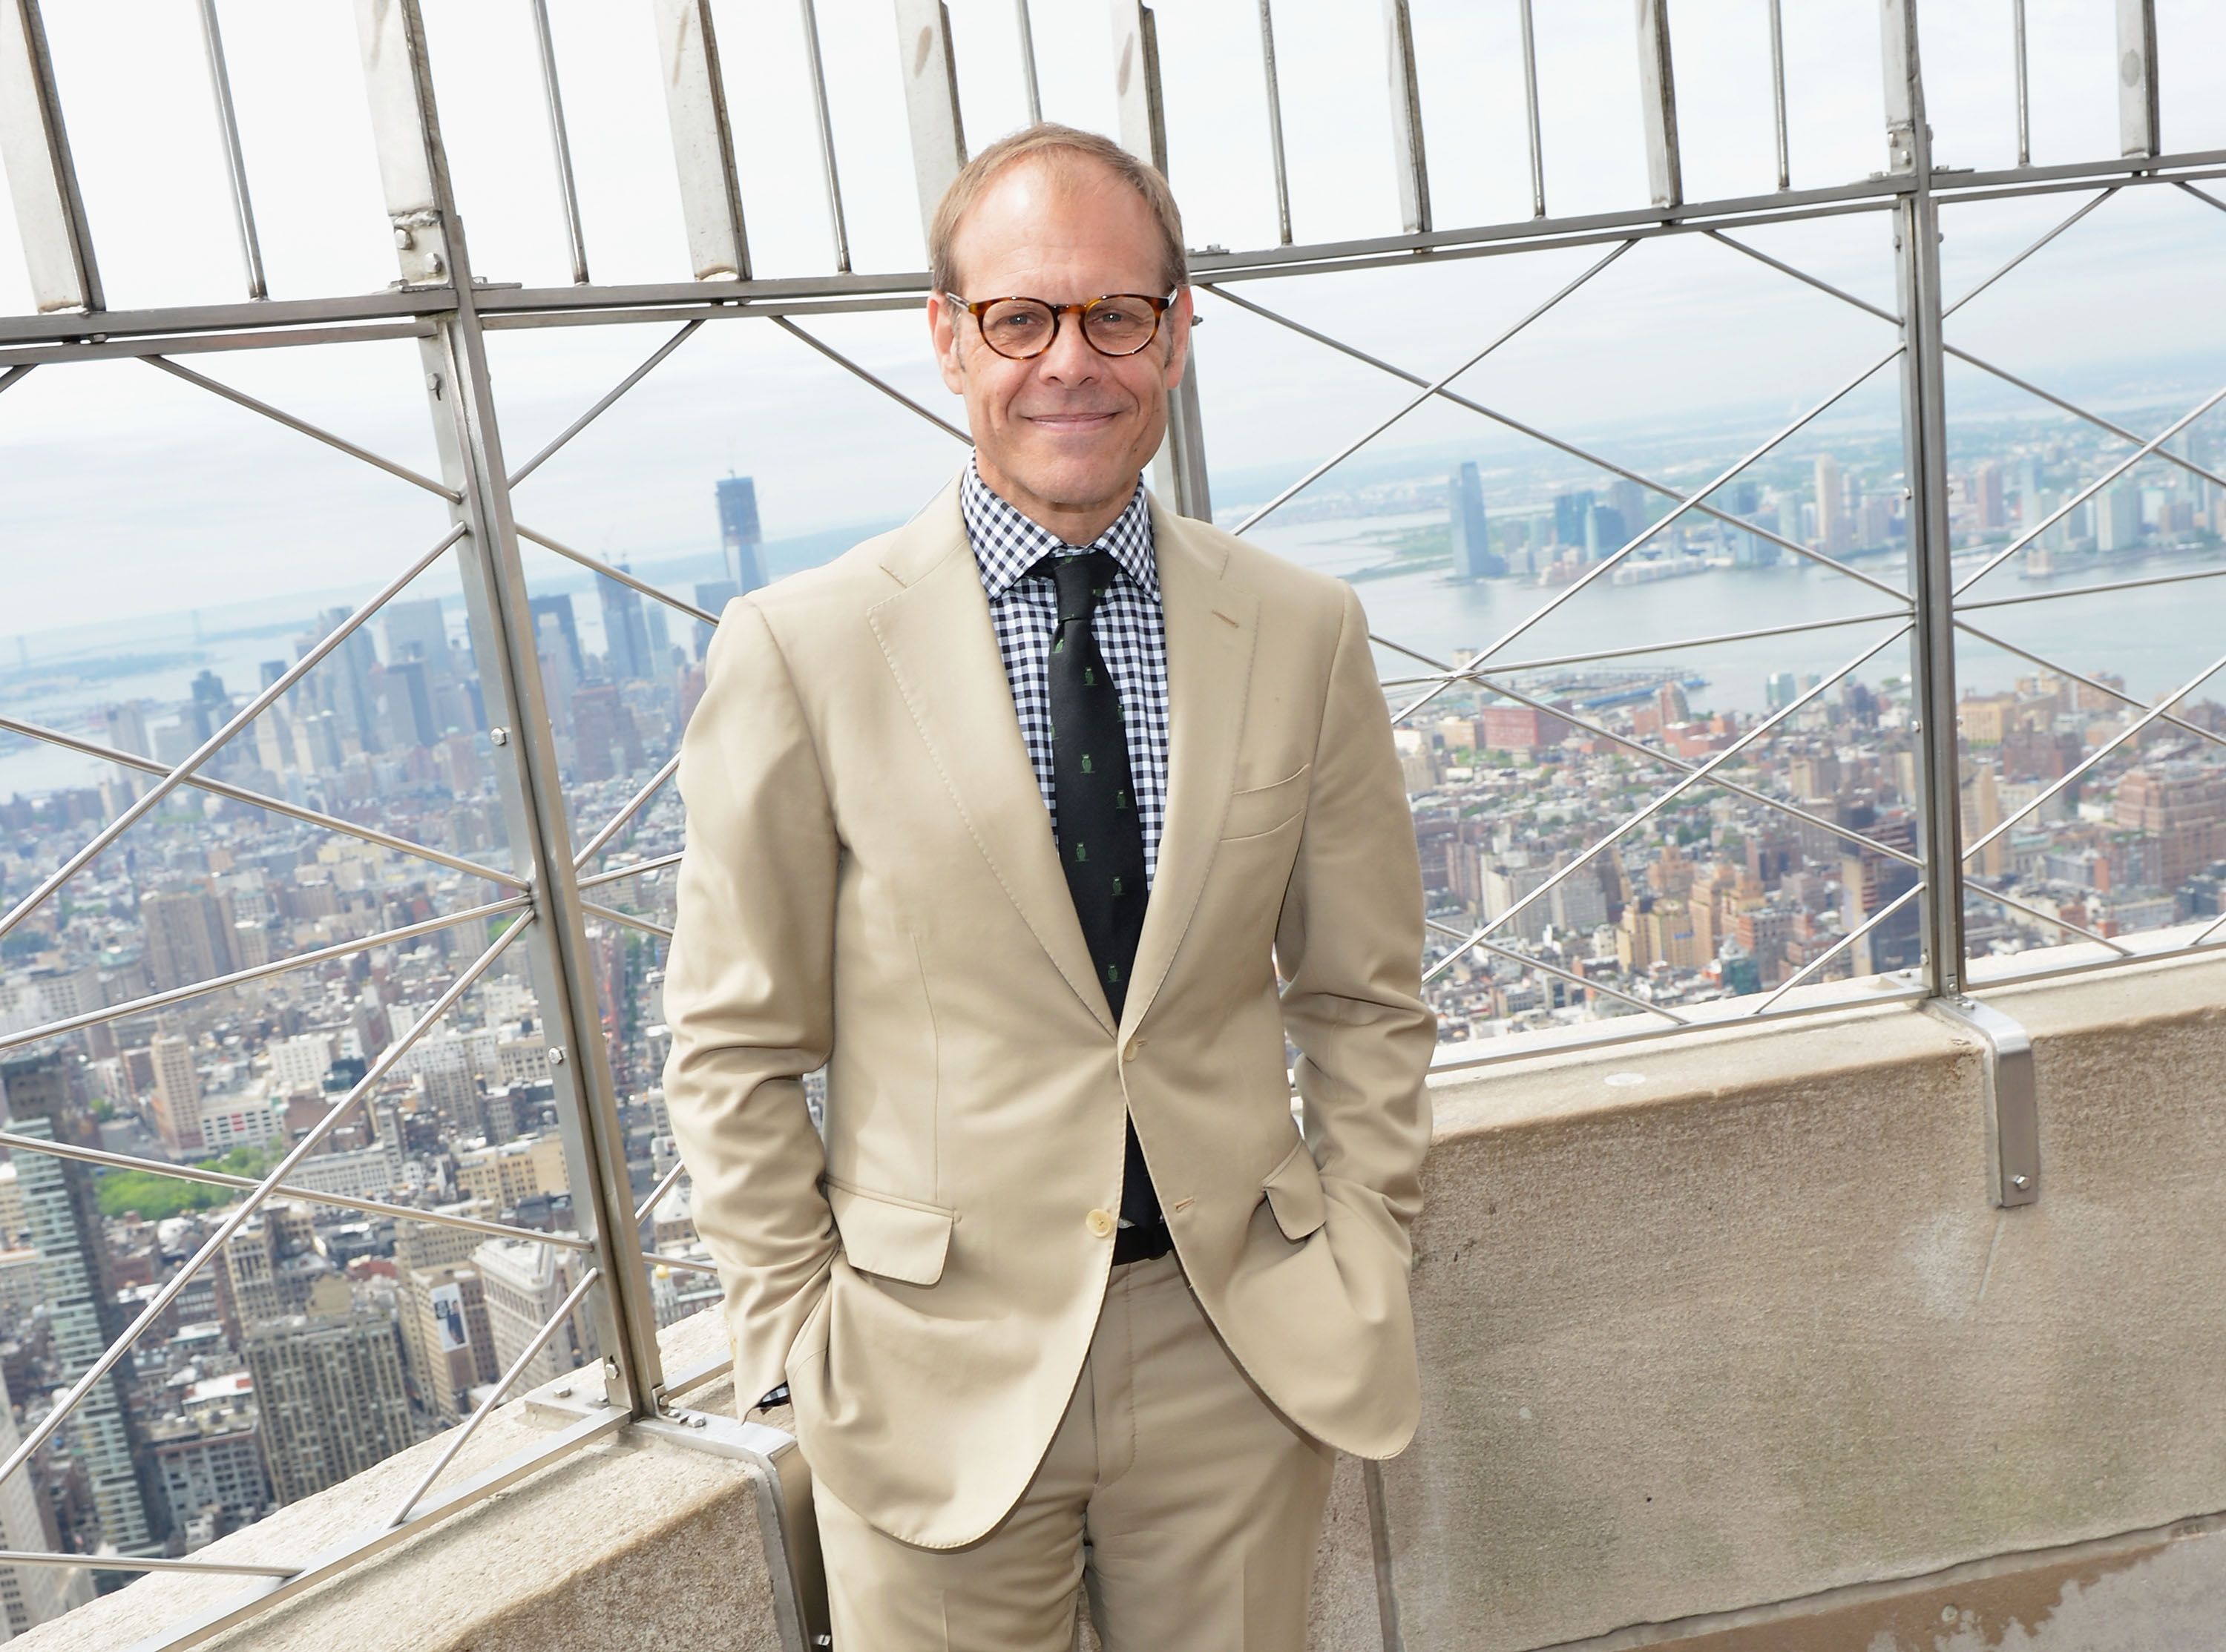 Alton Brown at Empire State Building Lighting In Celebration Of the 2012 James Beard Foundation on May 7, 2012 in New York City | Photo: Getty Images